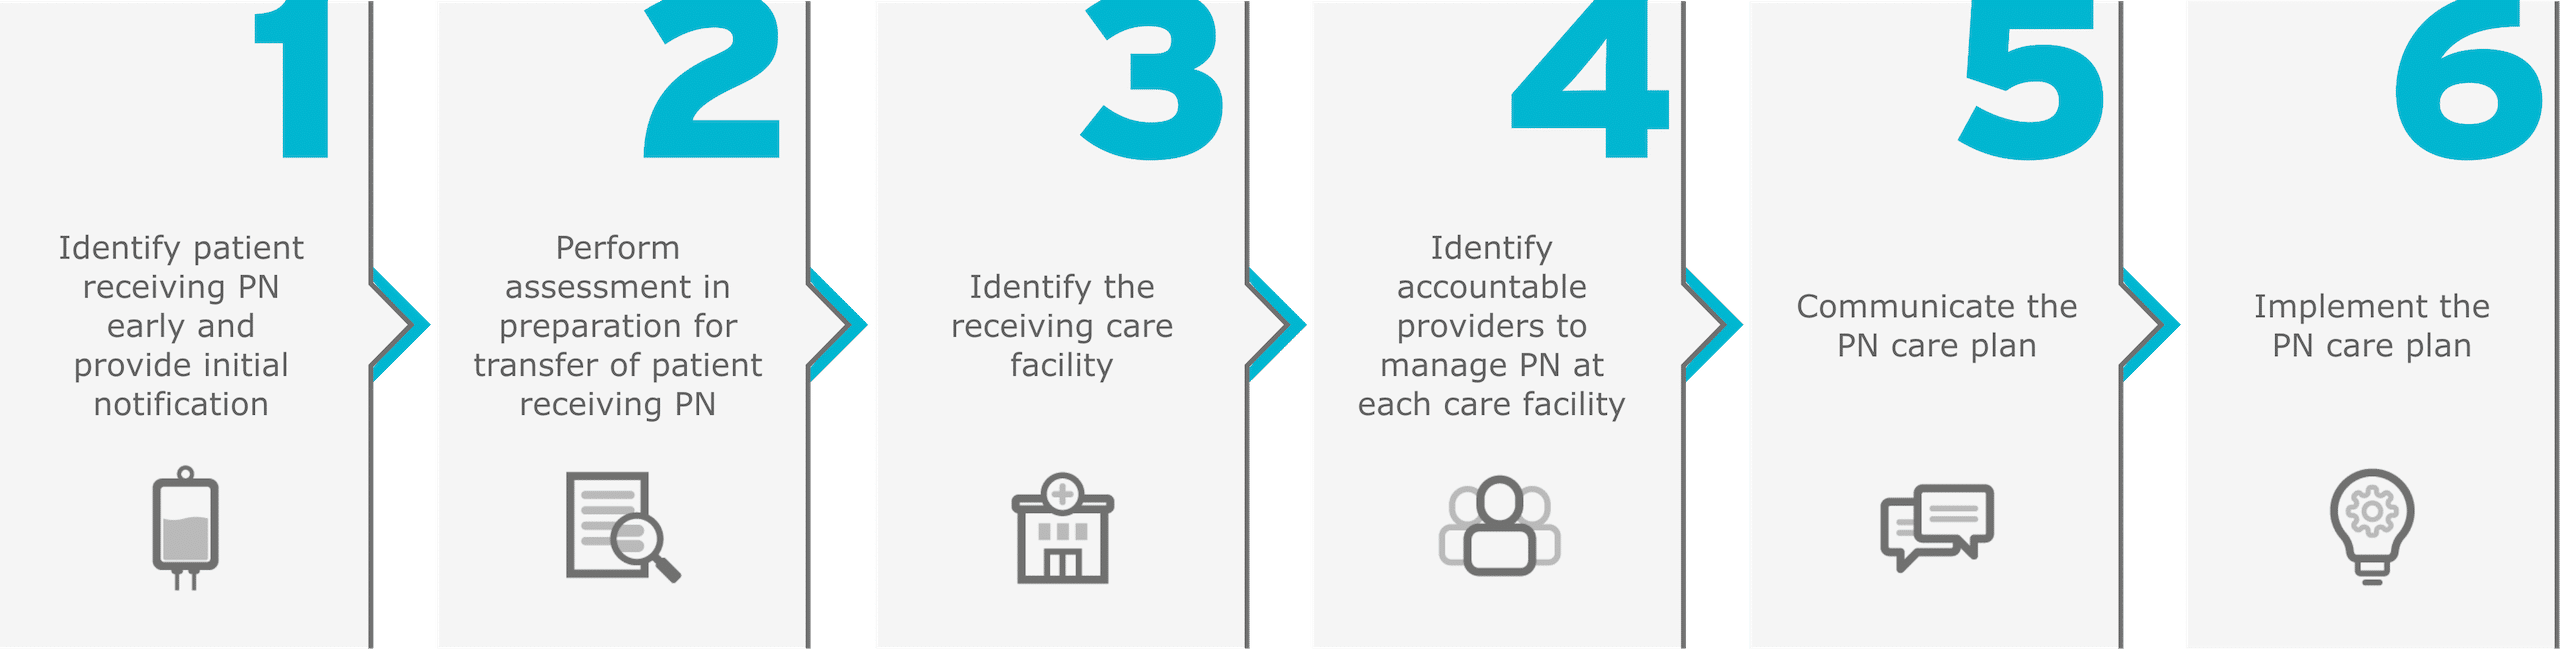 Step-by-step infographic outlining a six-phase process for patient care: 1. Identify patient receiving PN early and provide initial notification, 2. Perform assessment in preparation for transfer of patient receiving PN, 3. Identify the receiving care facility, 4. Identify accountable providers to manage PN at each care facility, 5. Communicate the PN care plan, 6. Implement the PN care plan.